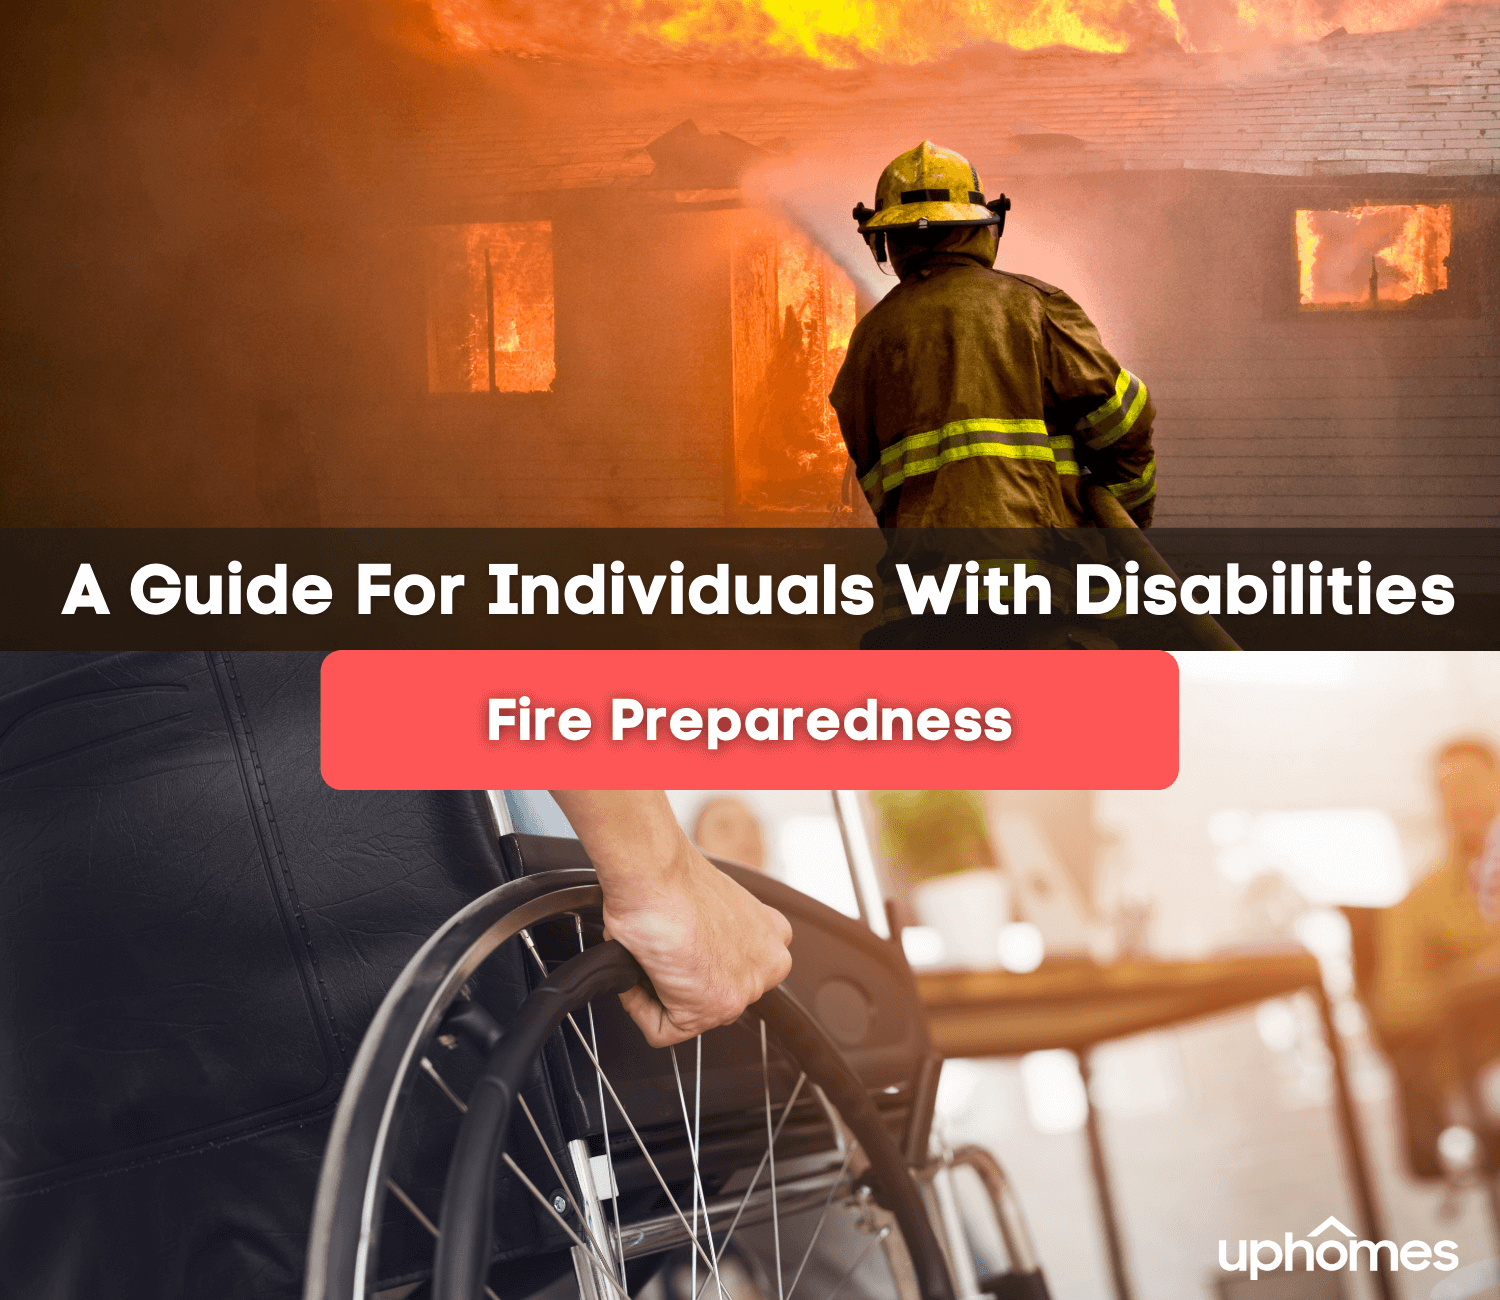 Fire Preparedness: An at home Guide For Individuals with Disabilities